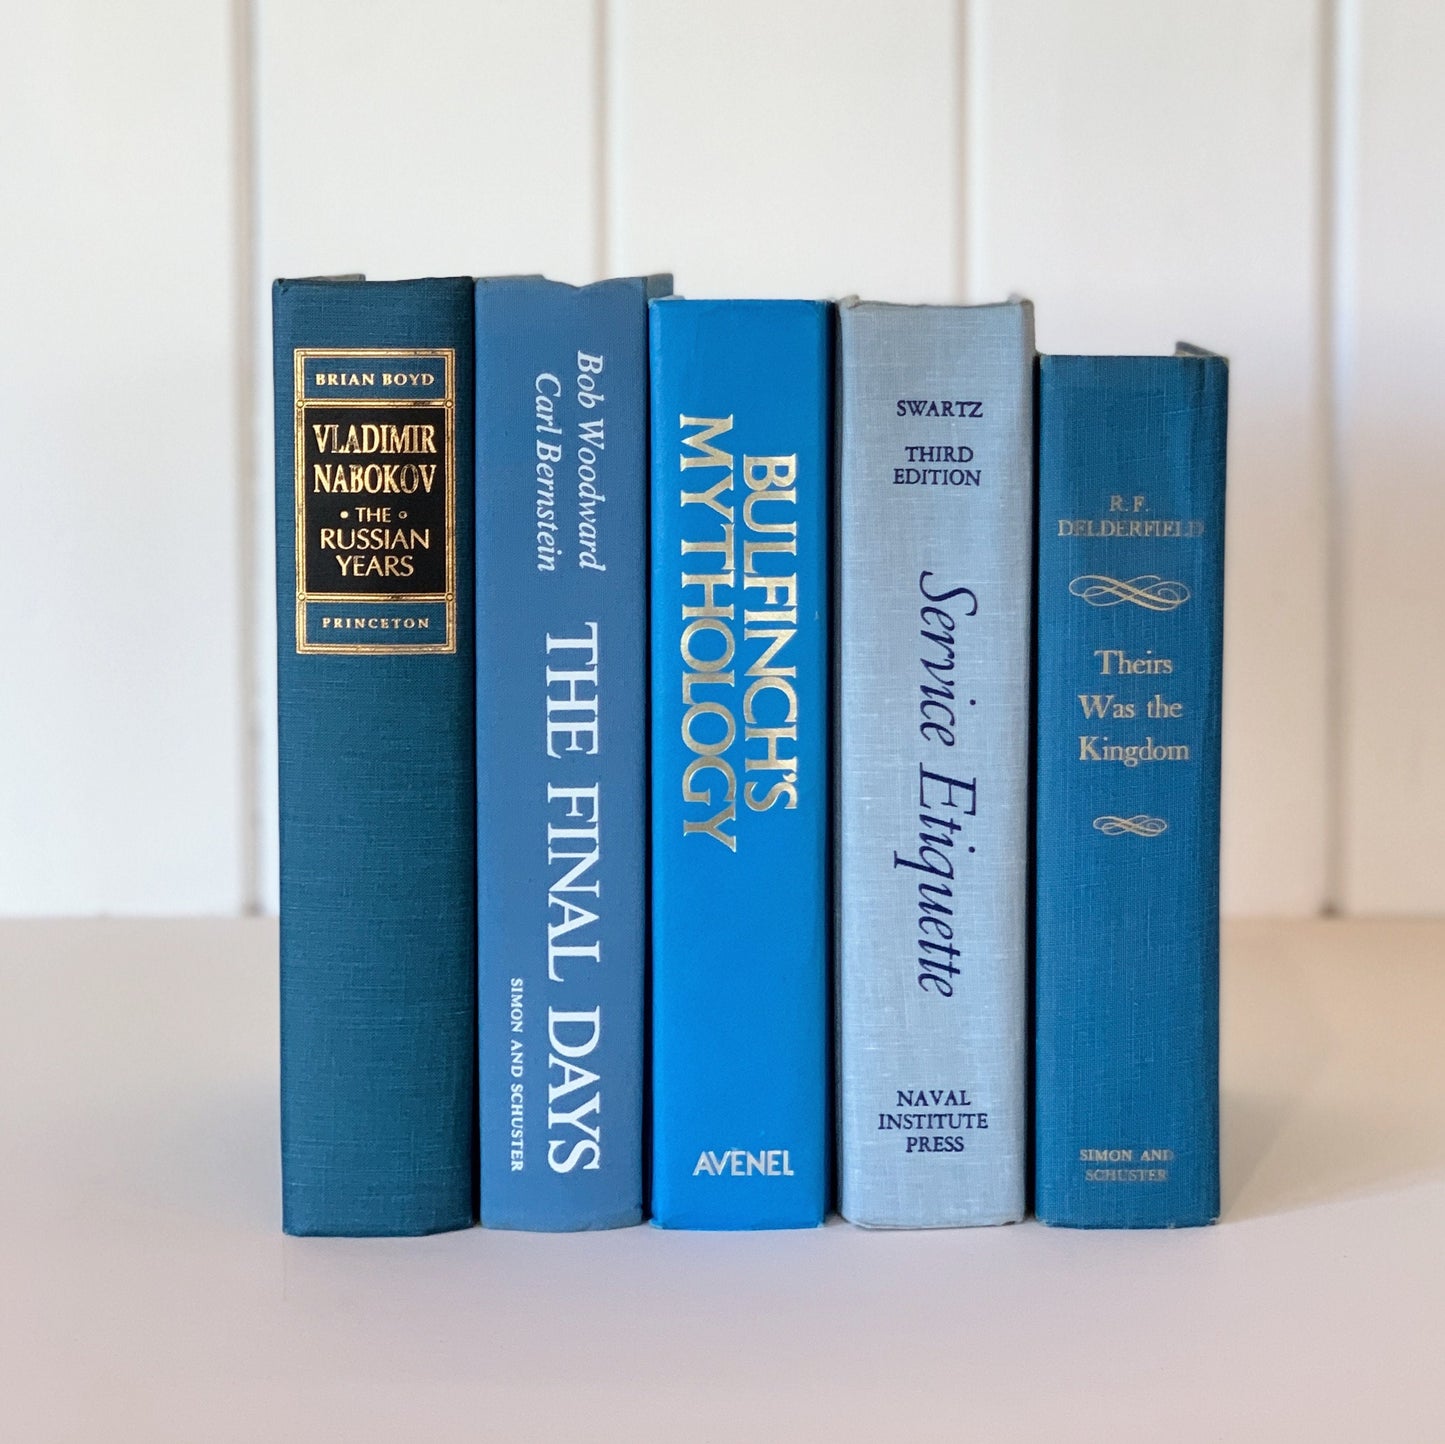 Blue Oversized Books for Decor, Books By Color, Vintage Books for Shelf Styling